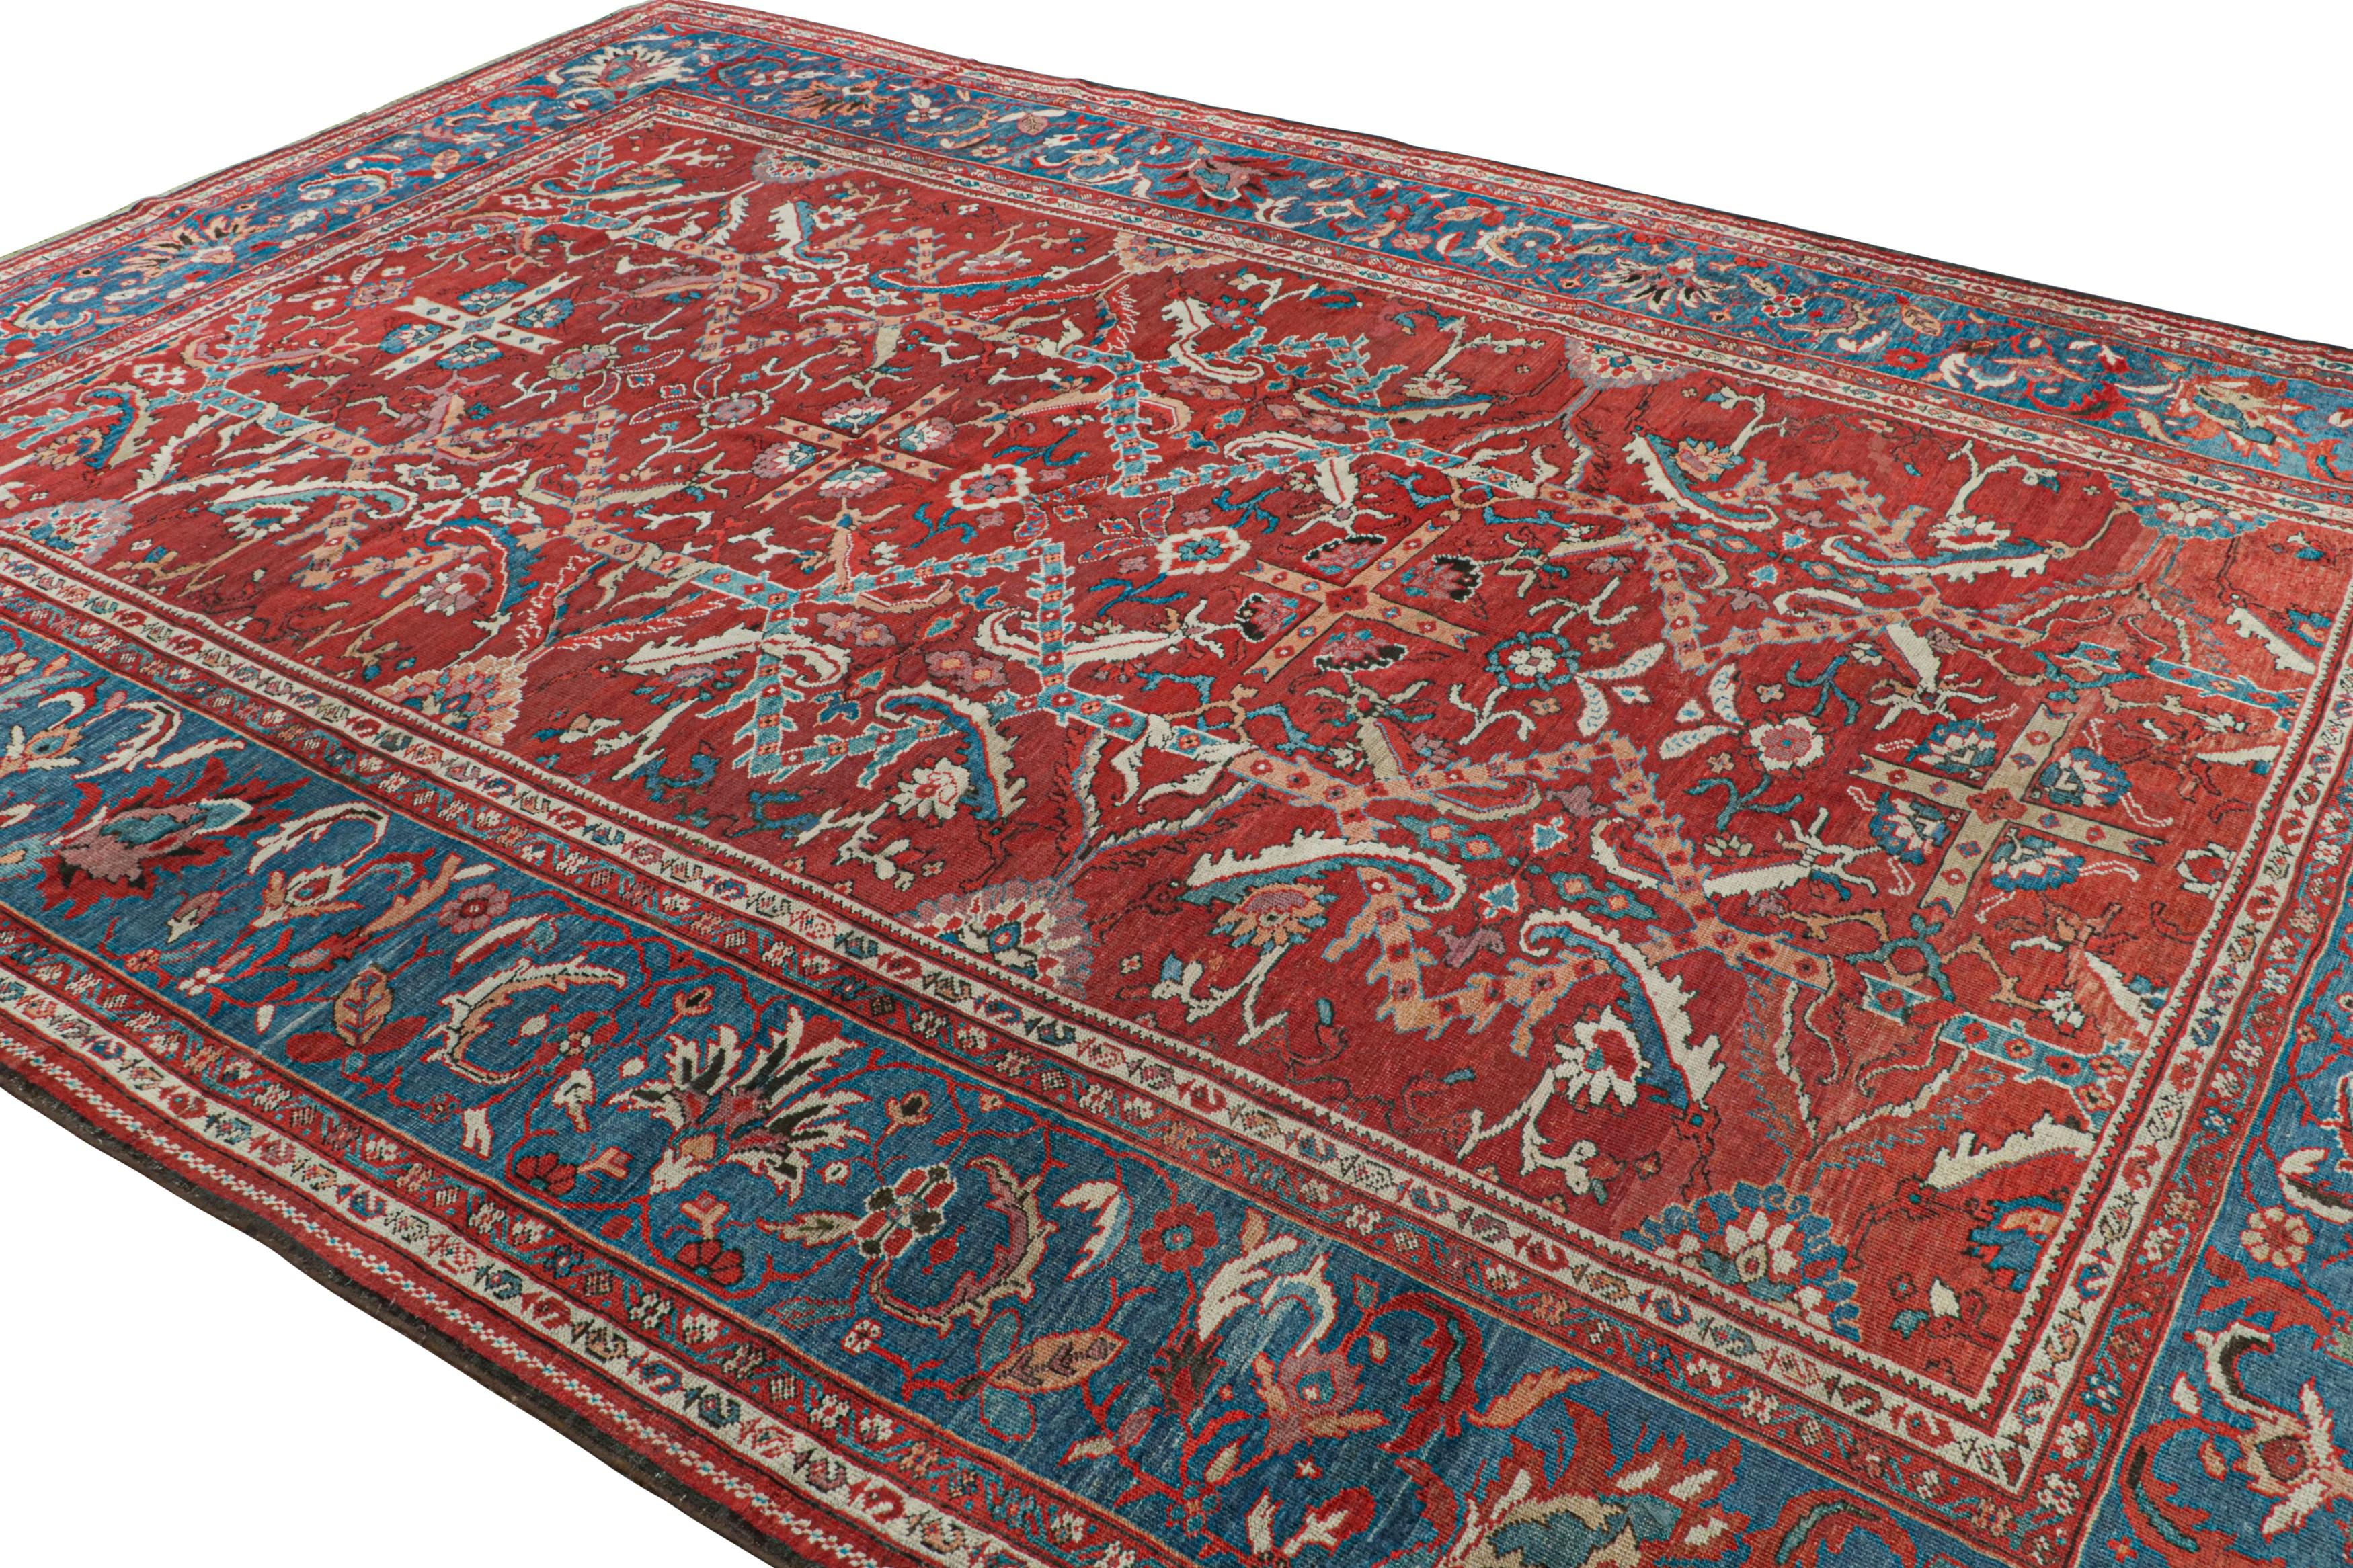 Hand-knotted in wool, an antique 9x13 Persian Sultanabad rug circa 1920-1930 - curated by Rug & Kilim.

On the Design:

This rug enjoys a red field with blue borders. Keen eyes will note the employment of the same colors as the floral patterns with